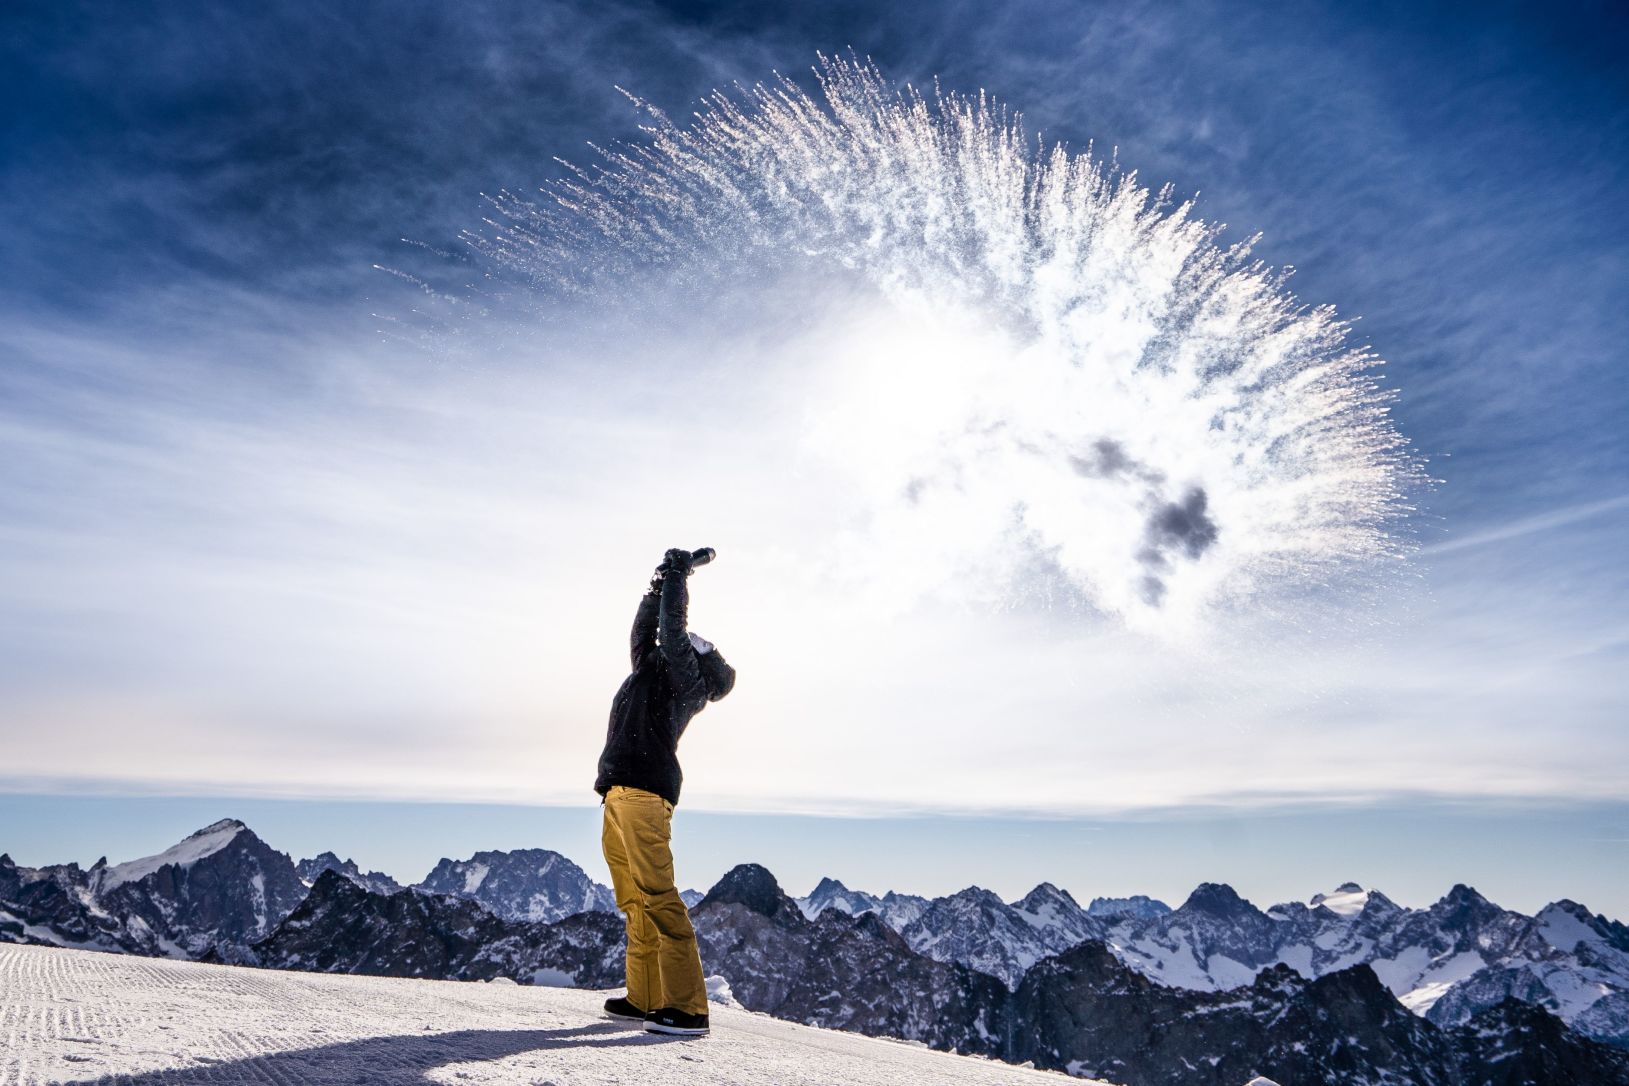 Skier throwing snow in the air